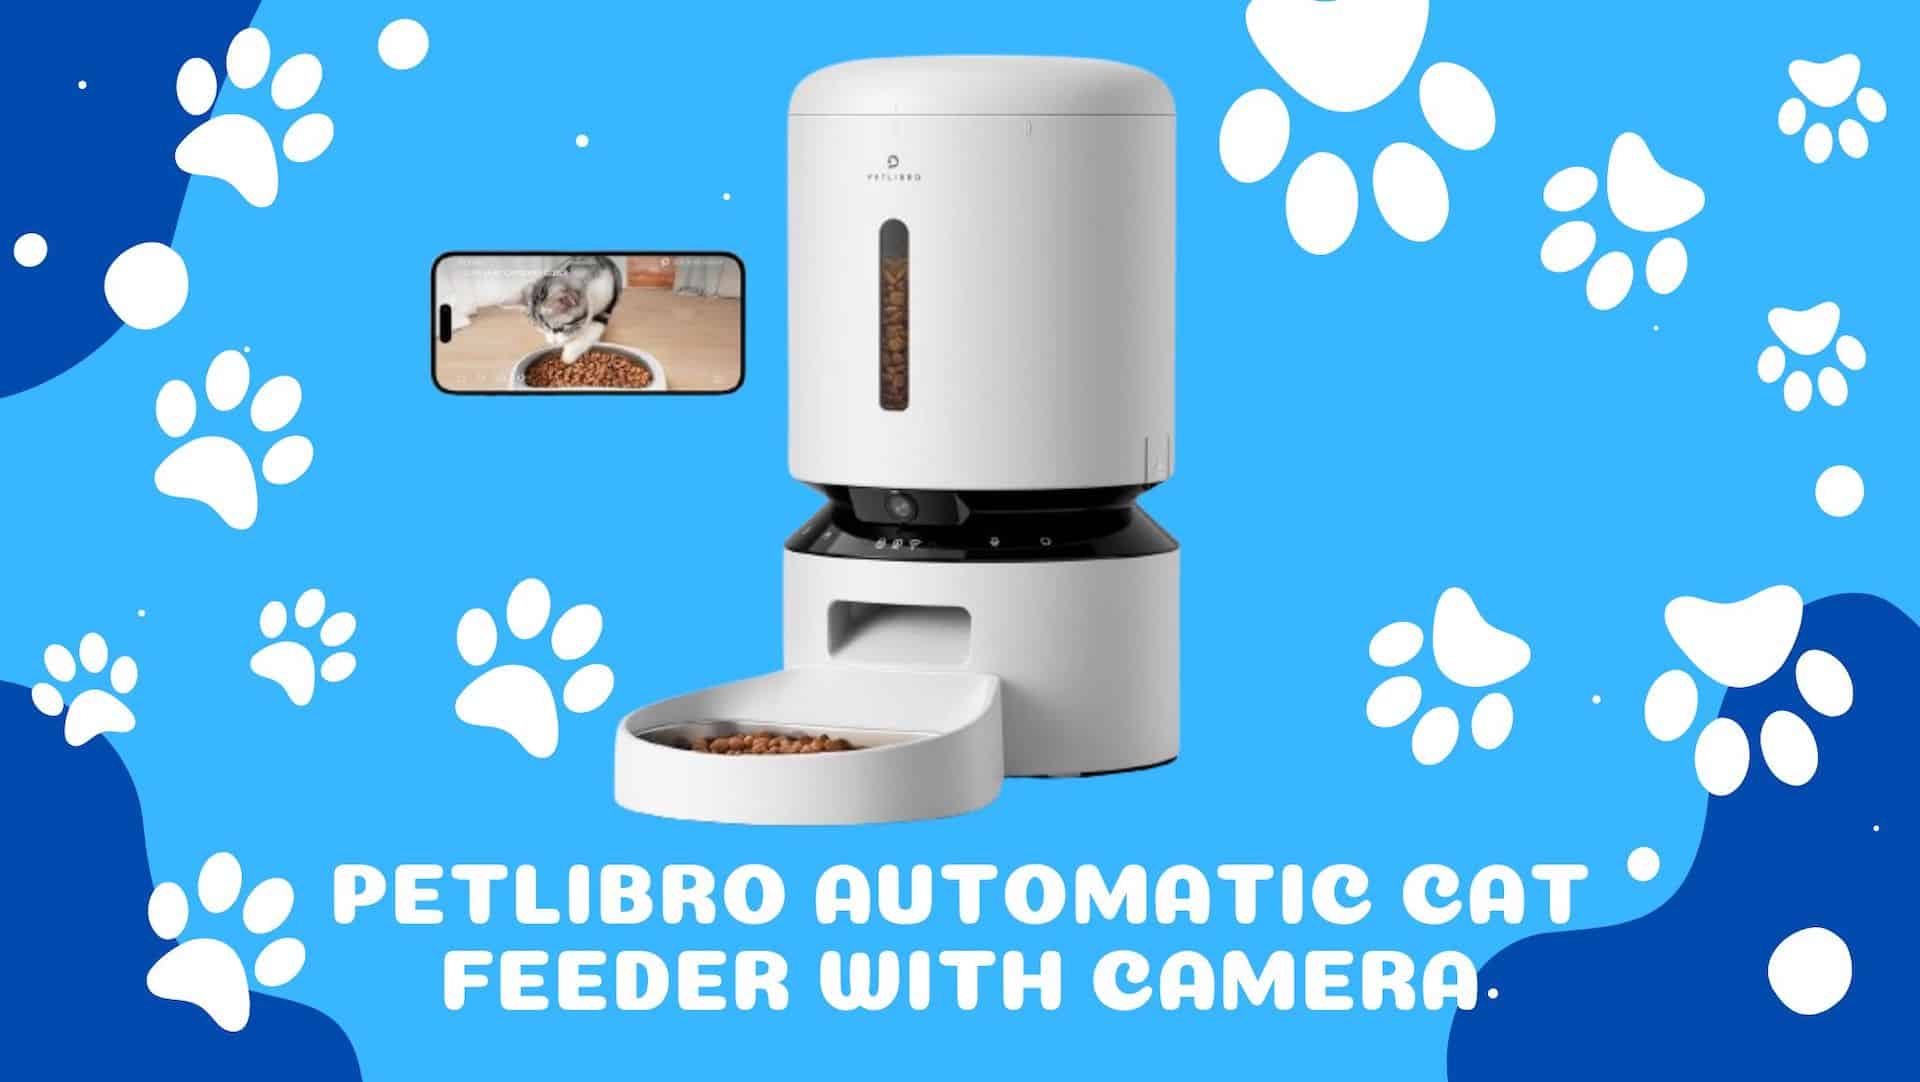 Use this automatic pet feeder if you are going on a short vacation and ADD all to bag